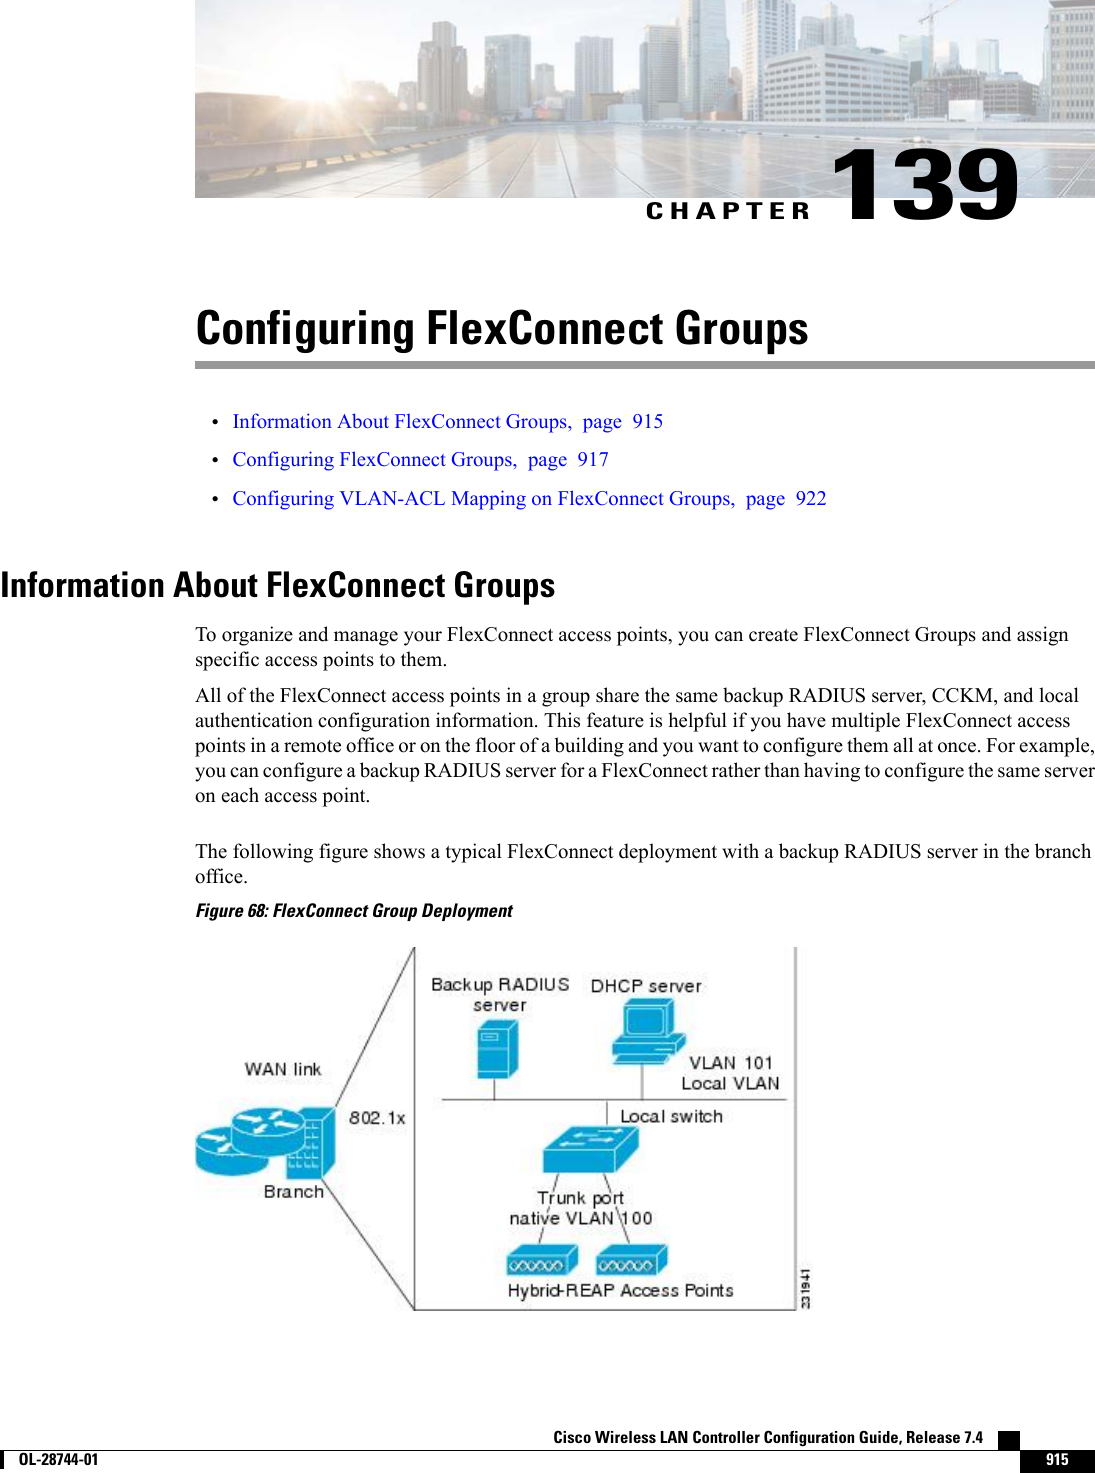 CHAPTER 139Configuring FlexConnect Groups•Information About FlexConnect Groups, page 915•Configuring FlexConnect Groups, page 917•Configuring VLAN-ACL Mapping on FlexConnect Groups, page 922Information About FlexConnect GroupsTo organize and manage your FlexConnect access points, you can create FlexConnect Groups and assignspecific access points to them.All of the FlexConnect access points in a group share the same backup RADIUS server, CCKM, and localauthentication configuration information. This feature is helpful if you have multiple FlexConnect accesspoints in a remote office or on the floor of a building and you want to configure them all at once. For example,you can configure a backup RADIUS server for a FlexConnect rather than having to configure the same serveron each access point.The following figure shows a typical FlexConnect deployment with a backup RADIUS server in the branchoffice.Figure 68: FlexConnect Group DeploymentCisco Wireless LAN Controller Configuration Guide, Release 7.4        OL-28744-01 915